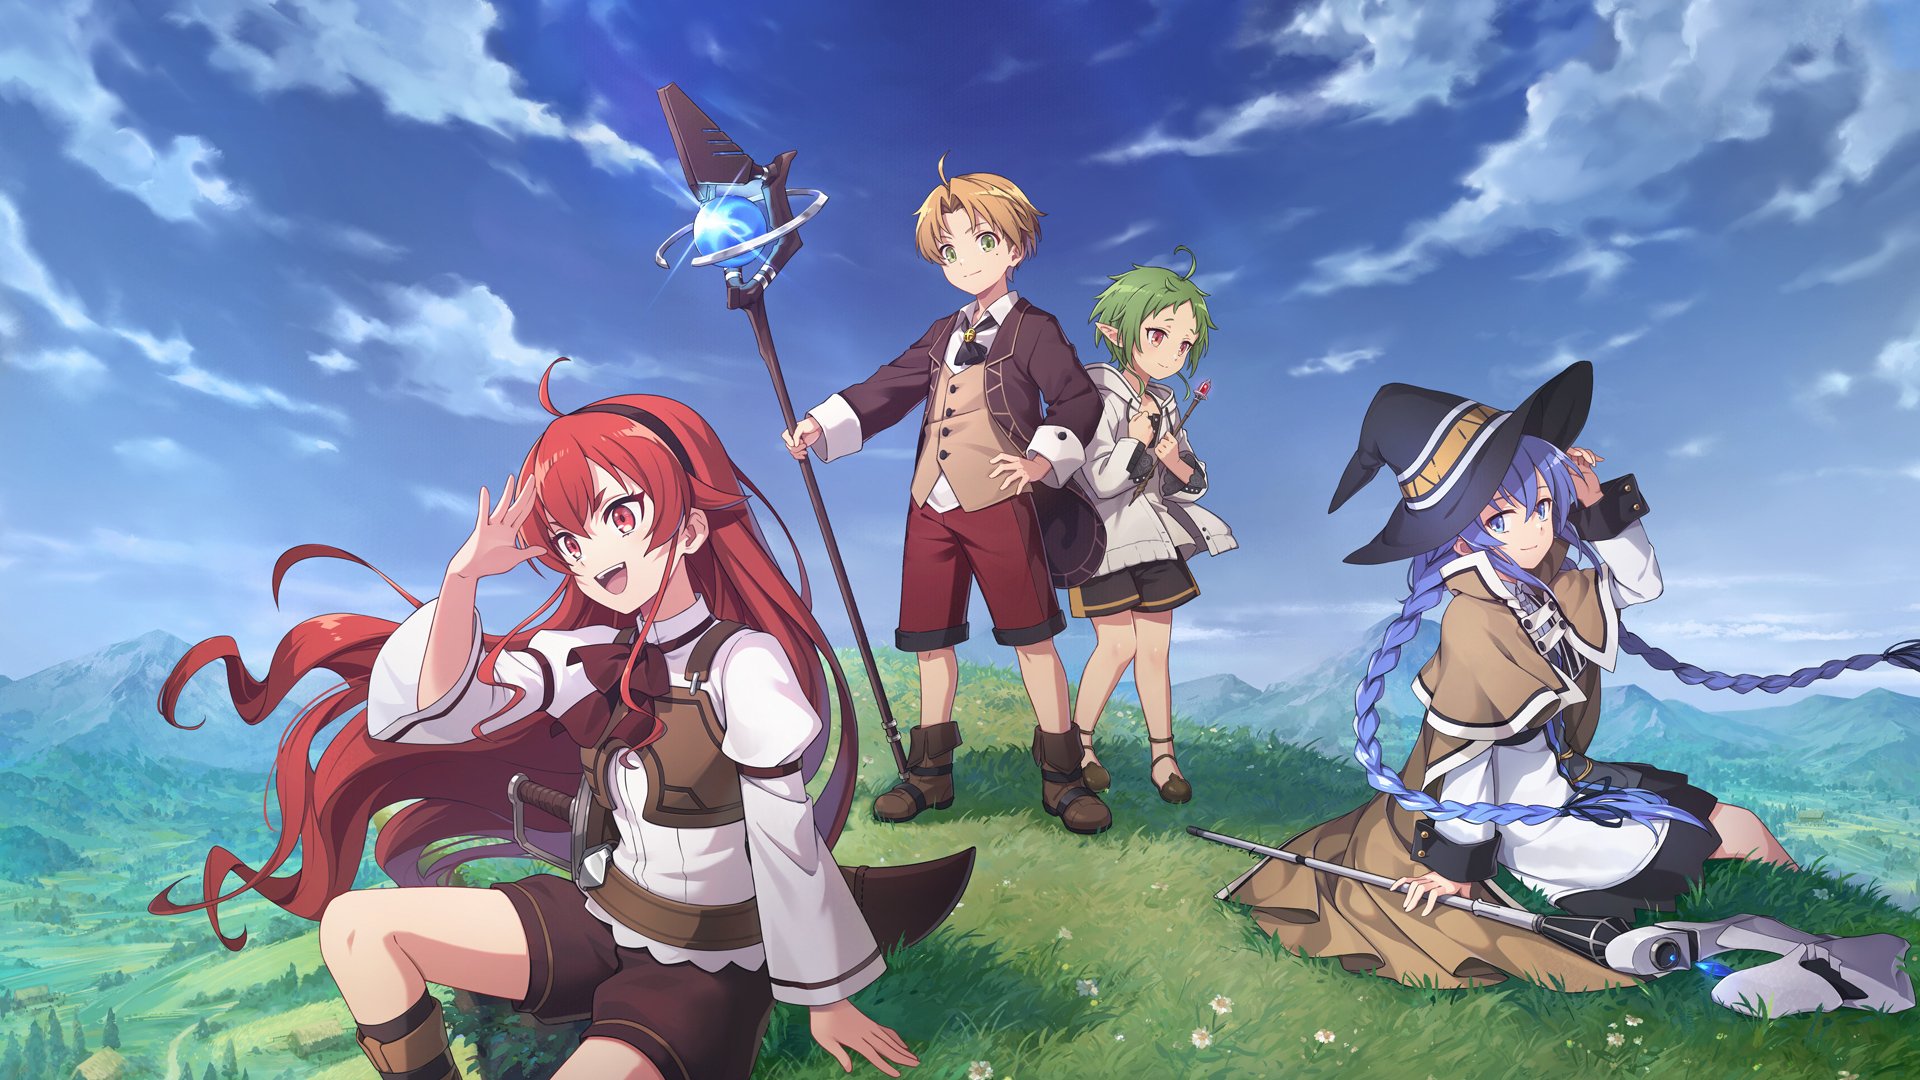 Mushoku Tensei Jobless Reincarnation season 2  Expected release date  where to watch what to expect and more